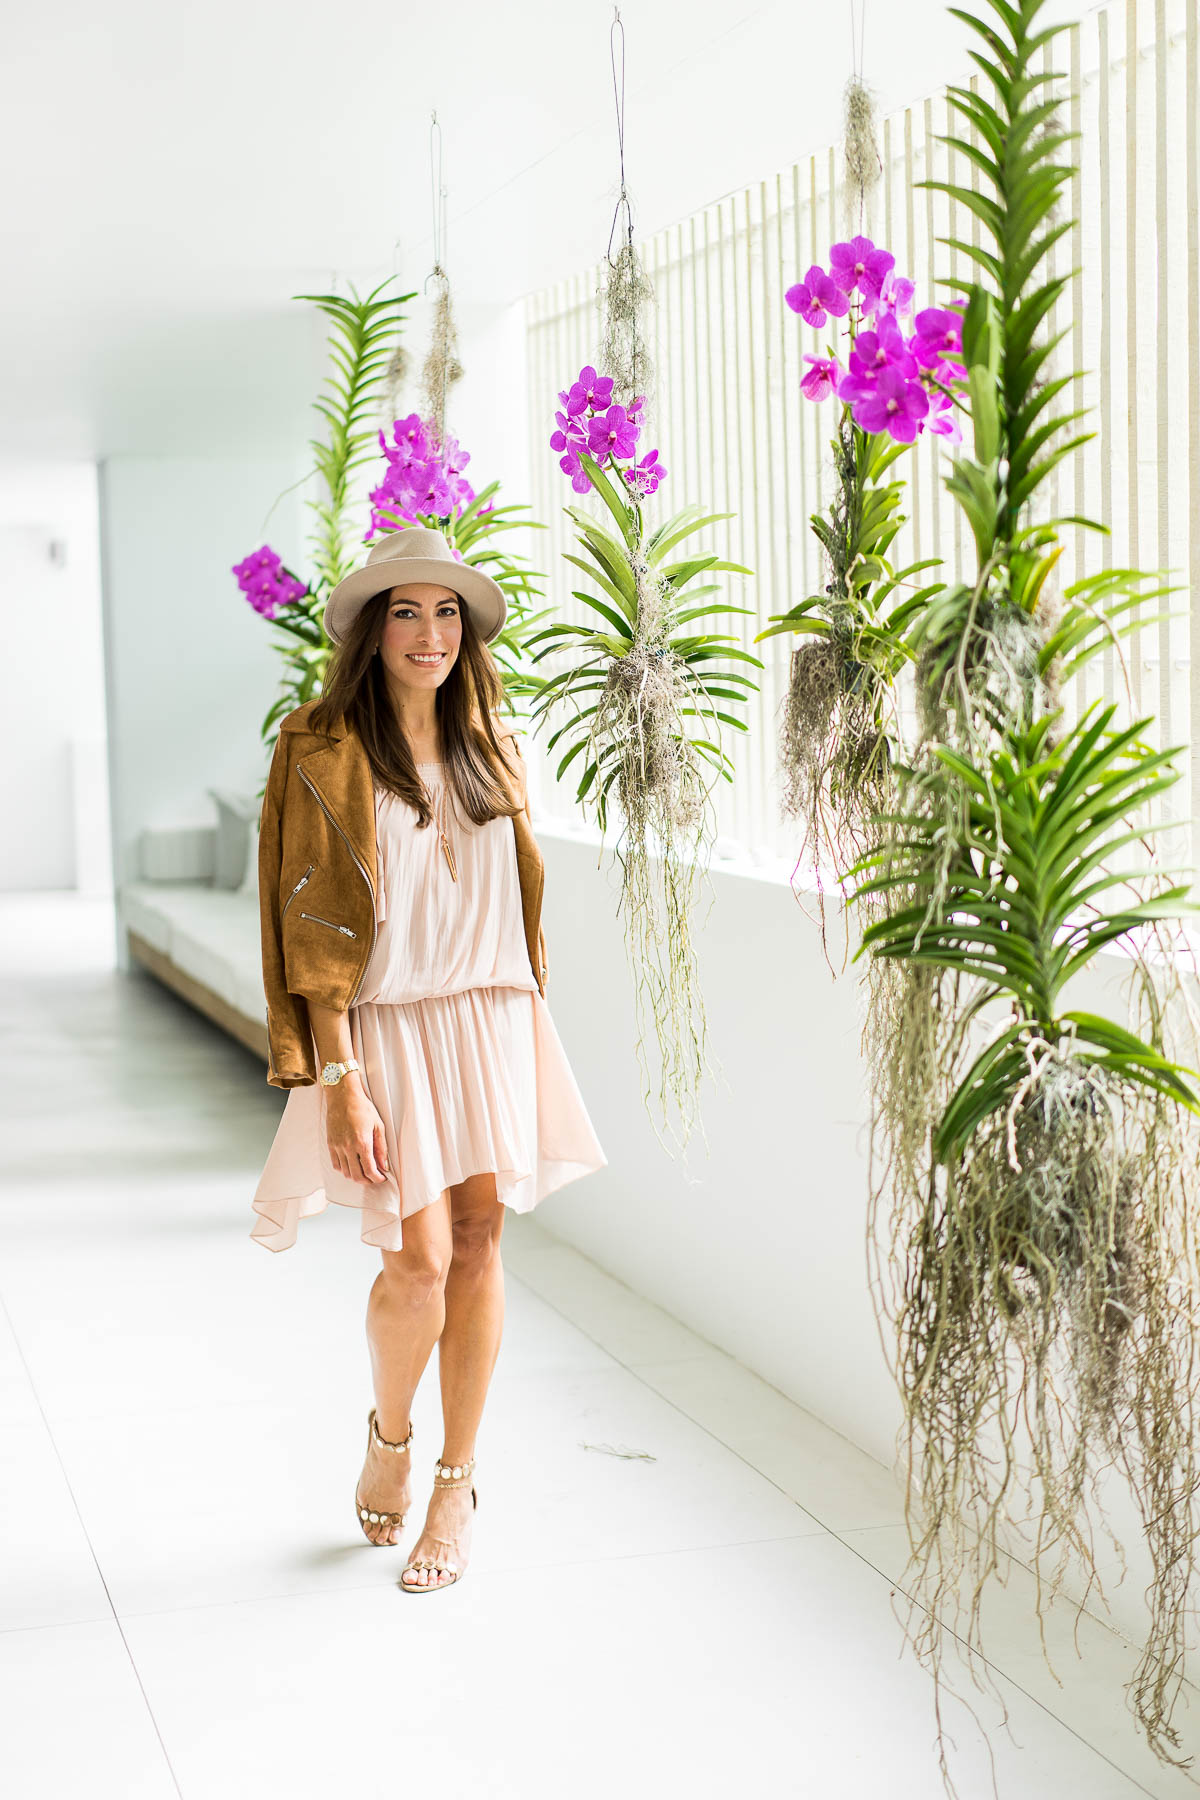 A Glam Lifestyle blogger Amanda wears Ramy Brook blush dress and tan suede moto jacket at Art Basel in Miami Beach 2016